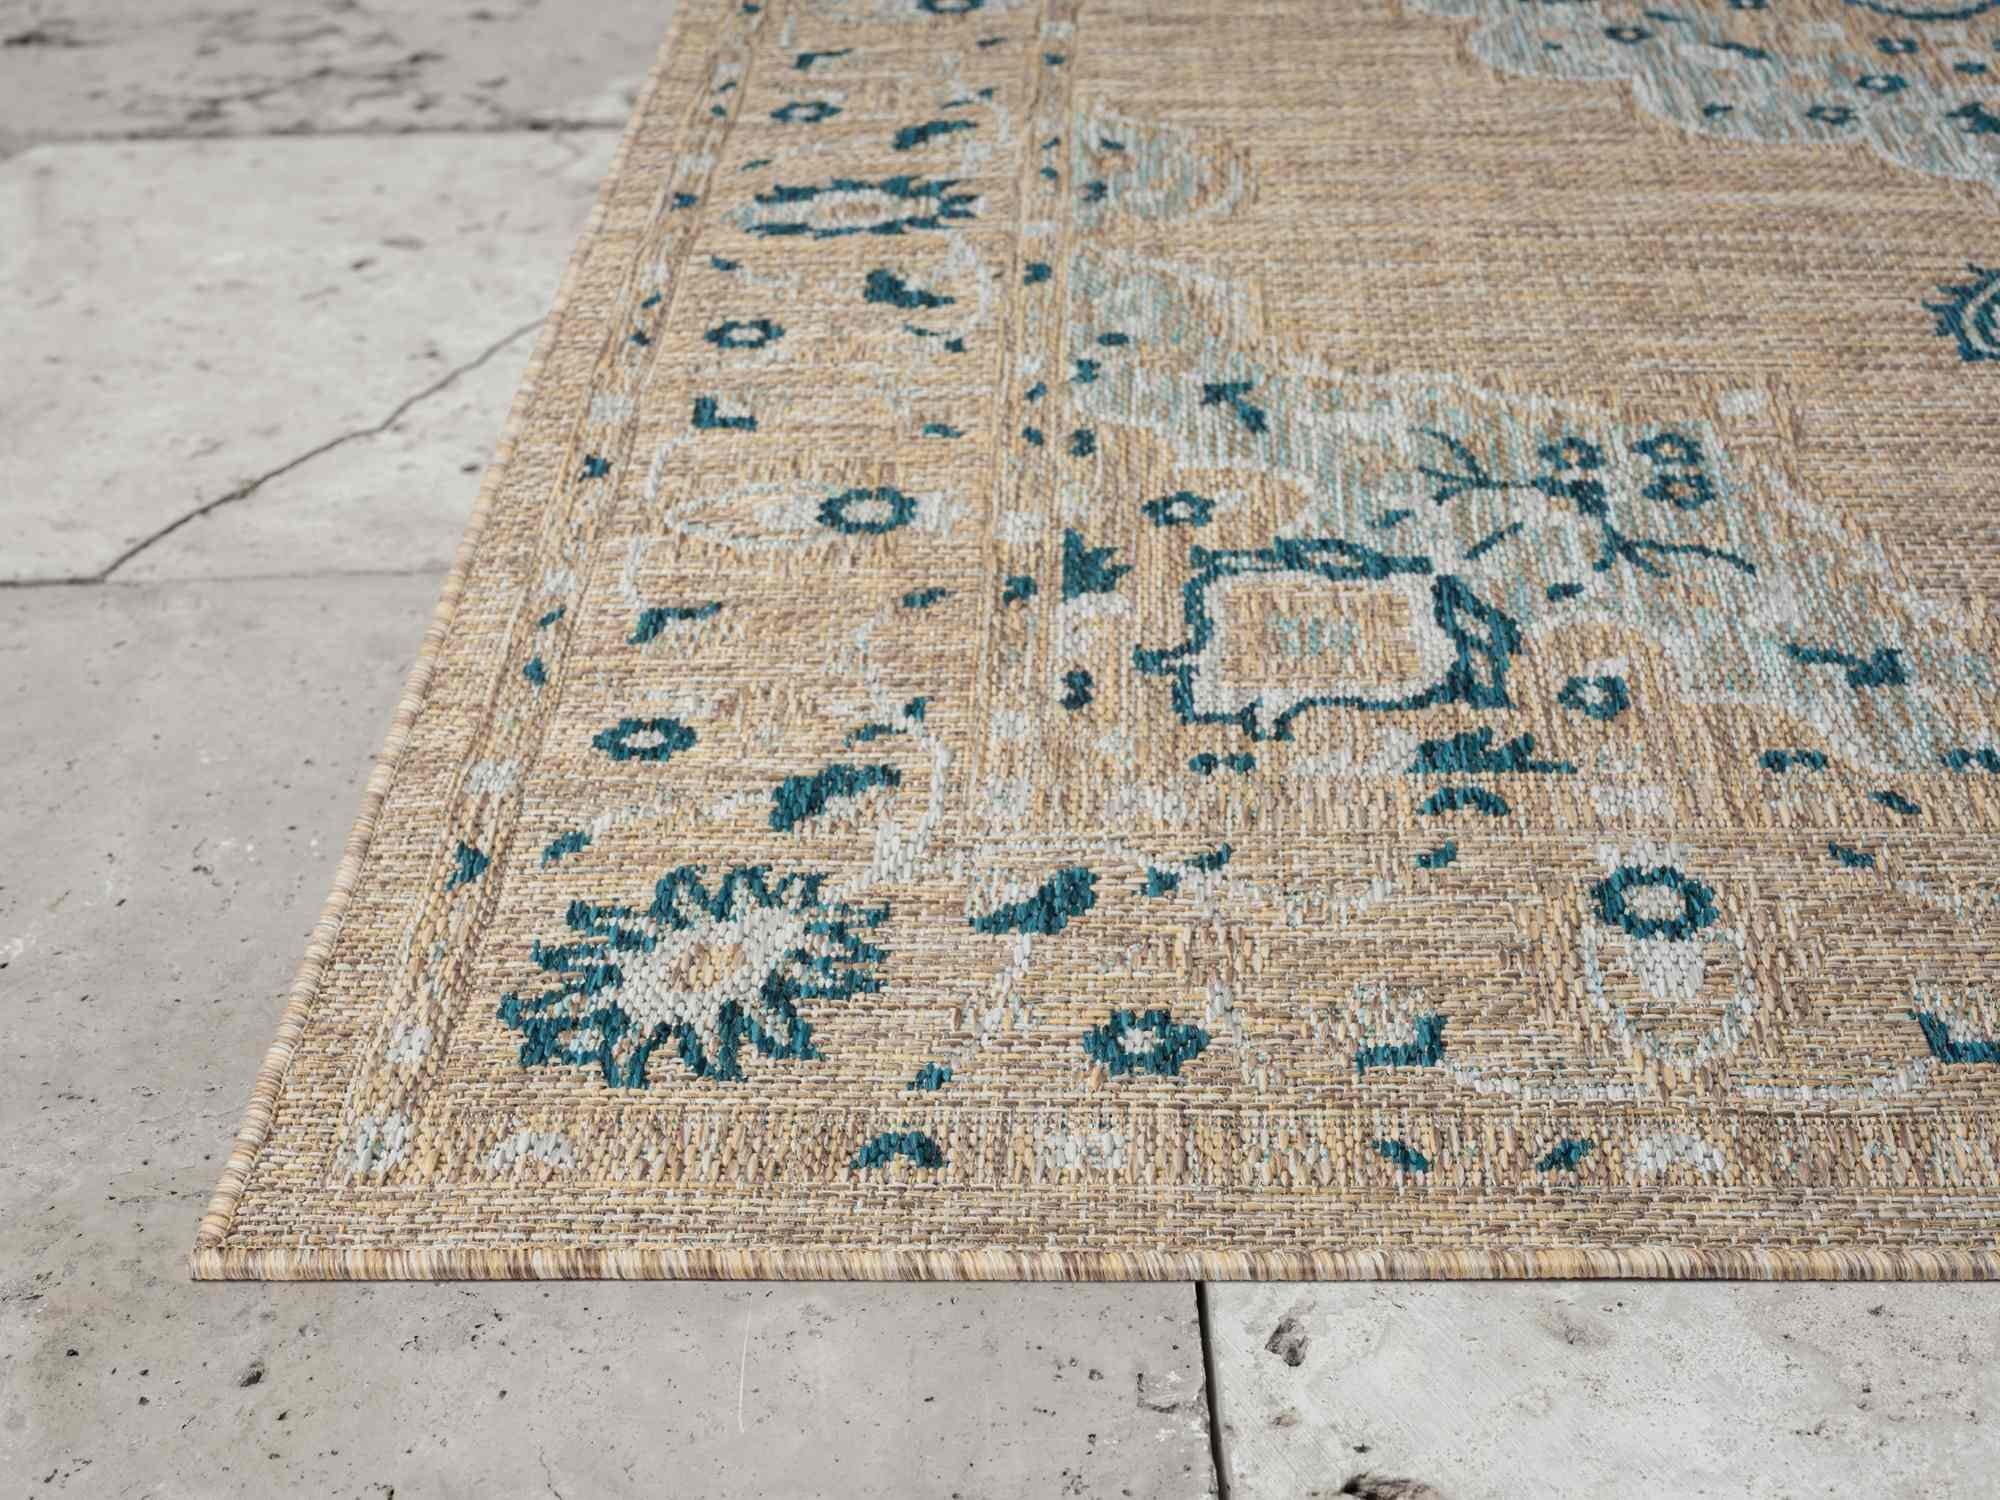 HR Waterproof Bohemian Traditional Design Outdoor Rug: Stain/Fade-Resistant #1672